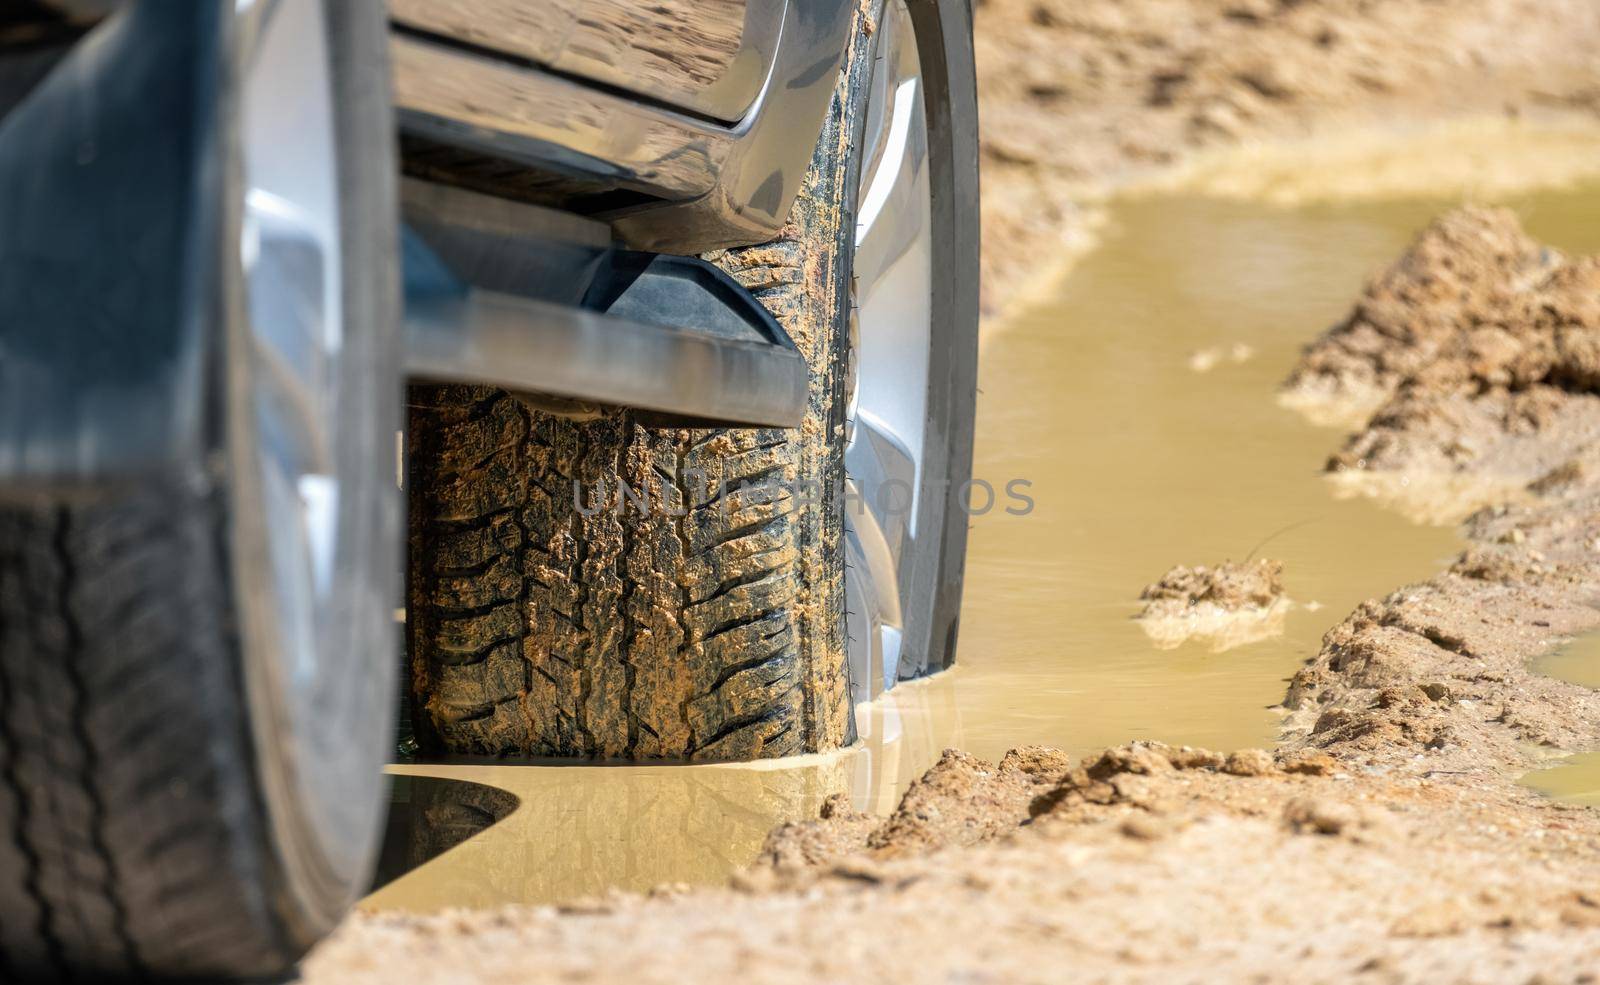 Suv 4wd car rides through deep muddy puddle by toa55